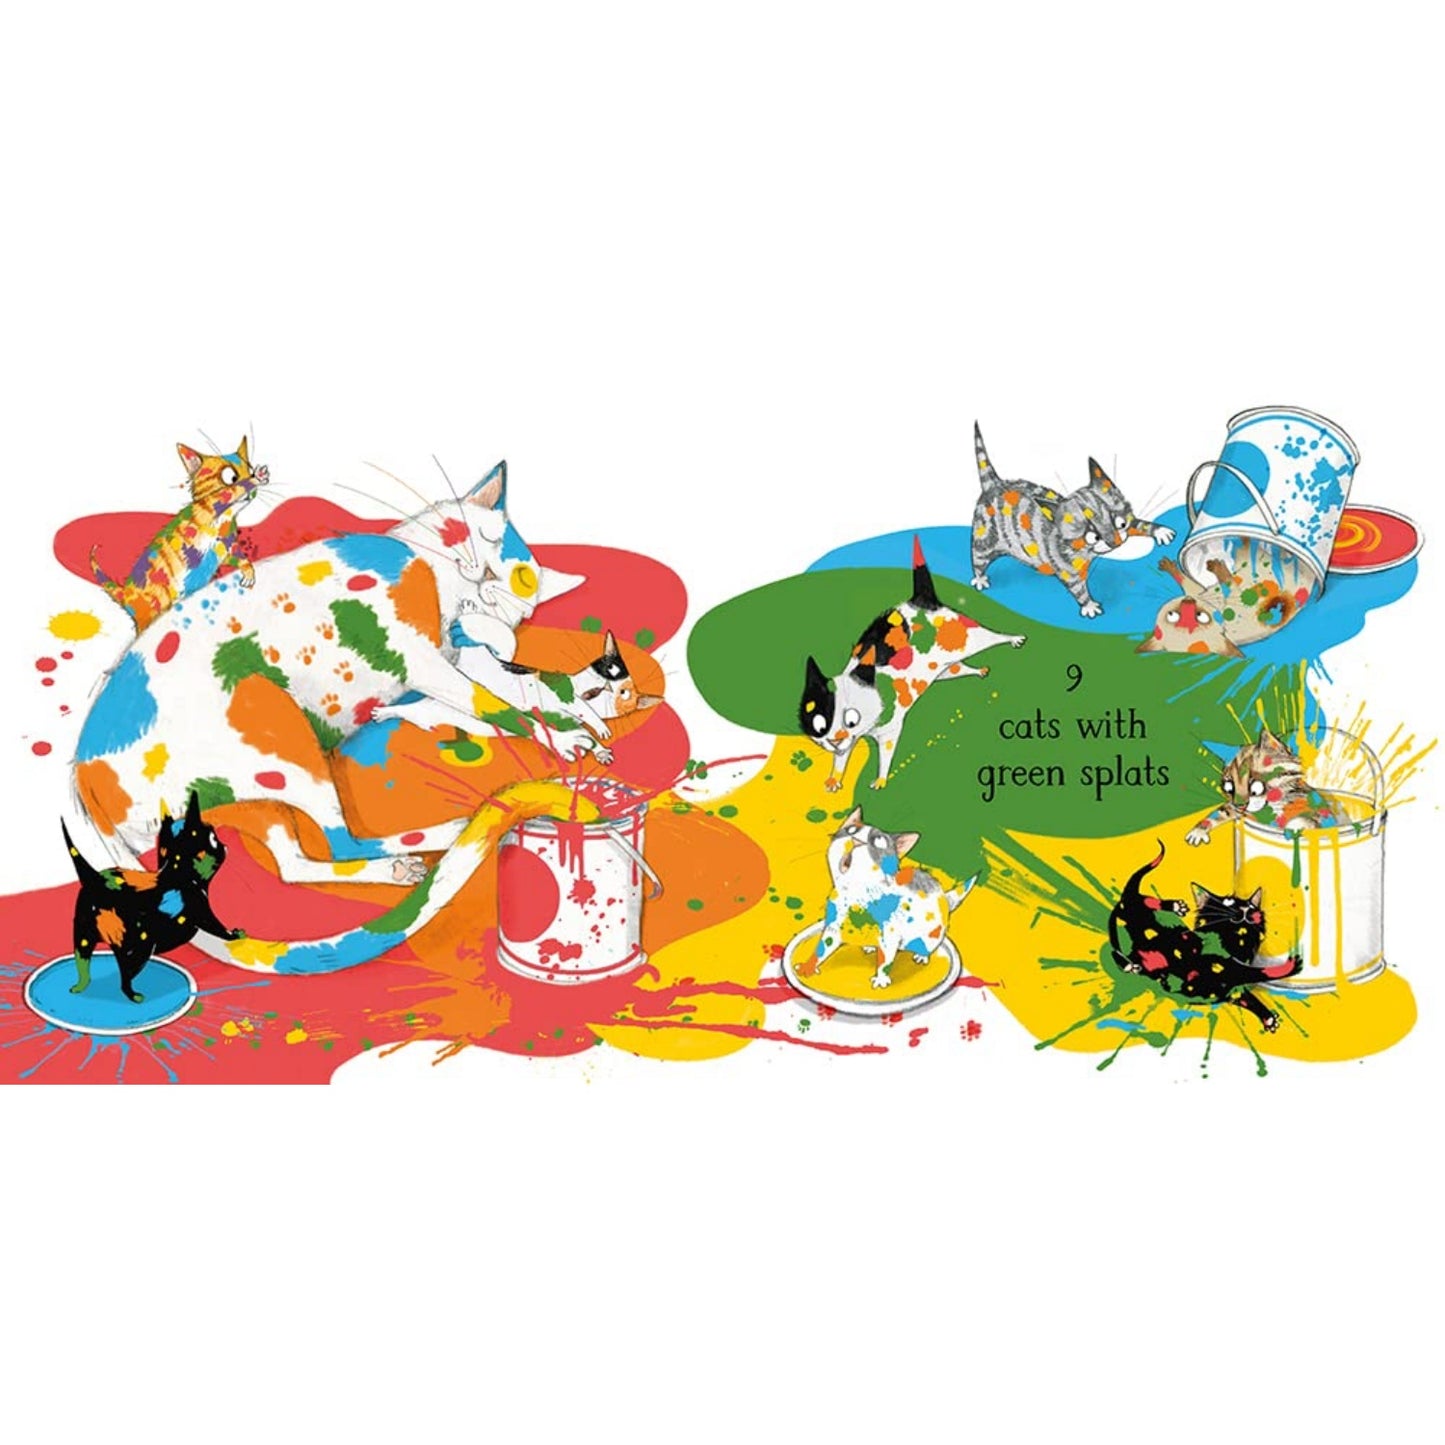 10 Cats | Hardcover | Children’s Early Learning Book